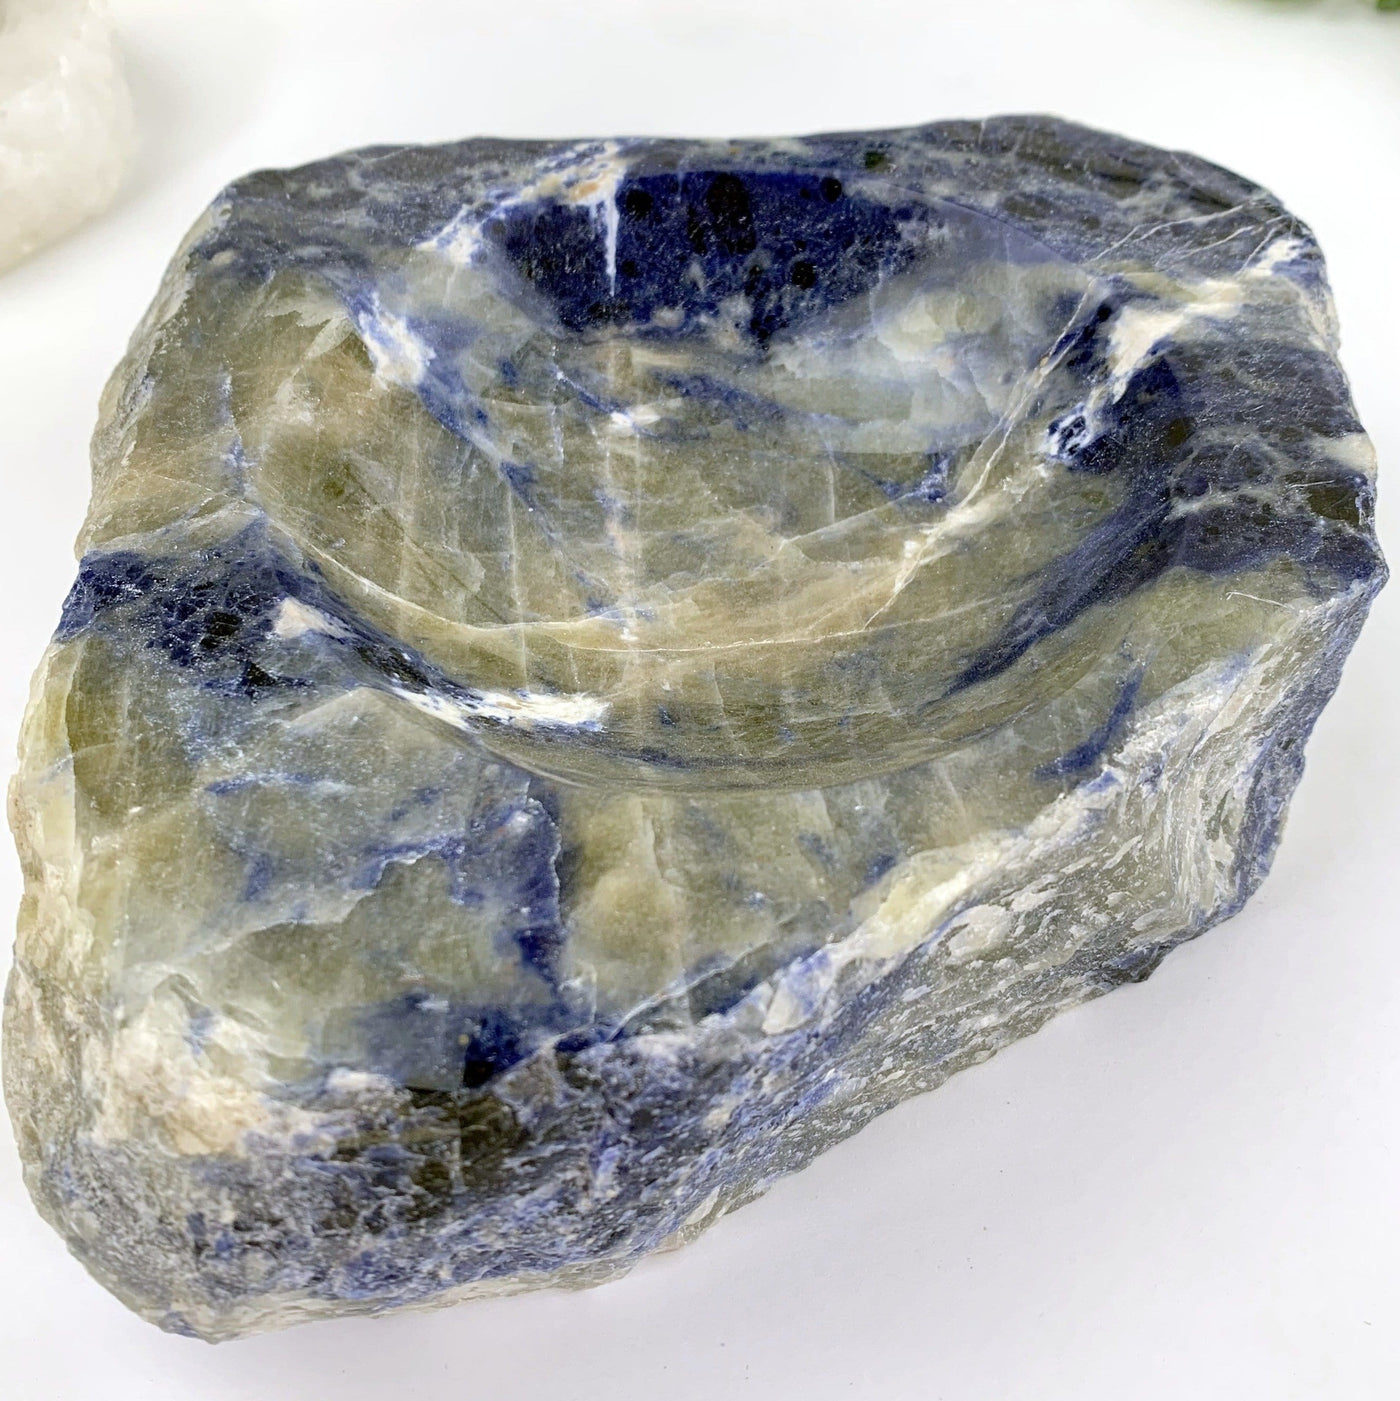 another close up angle of semi-polished sodalite bowl on display for details